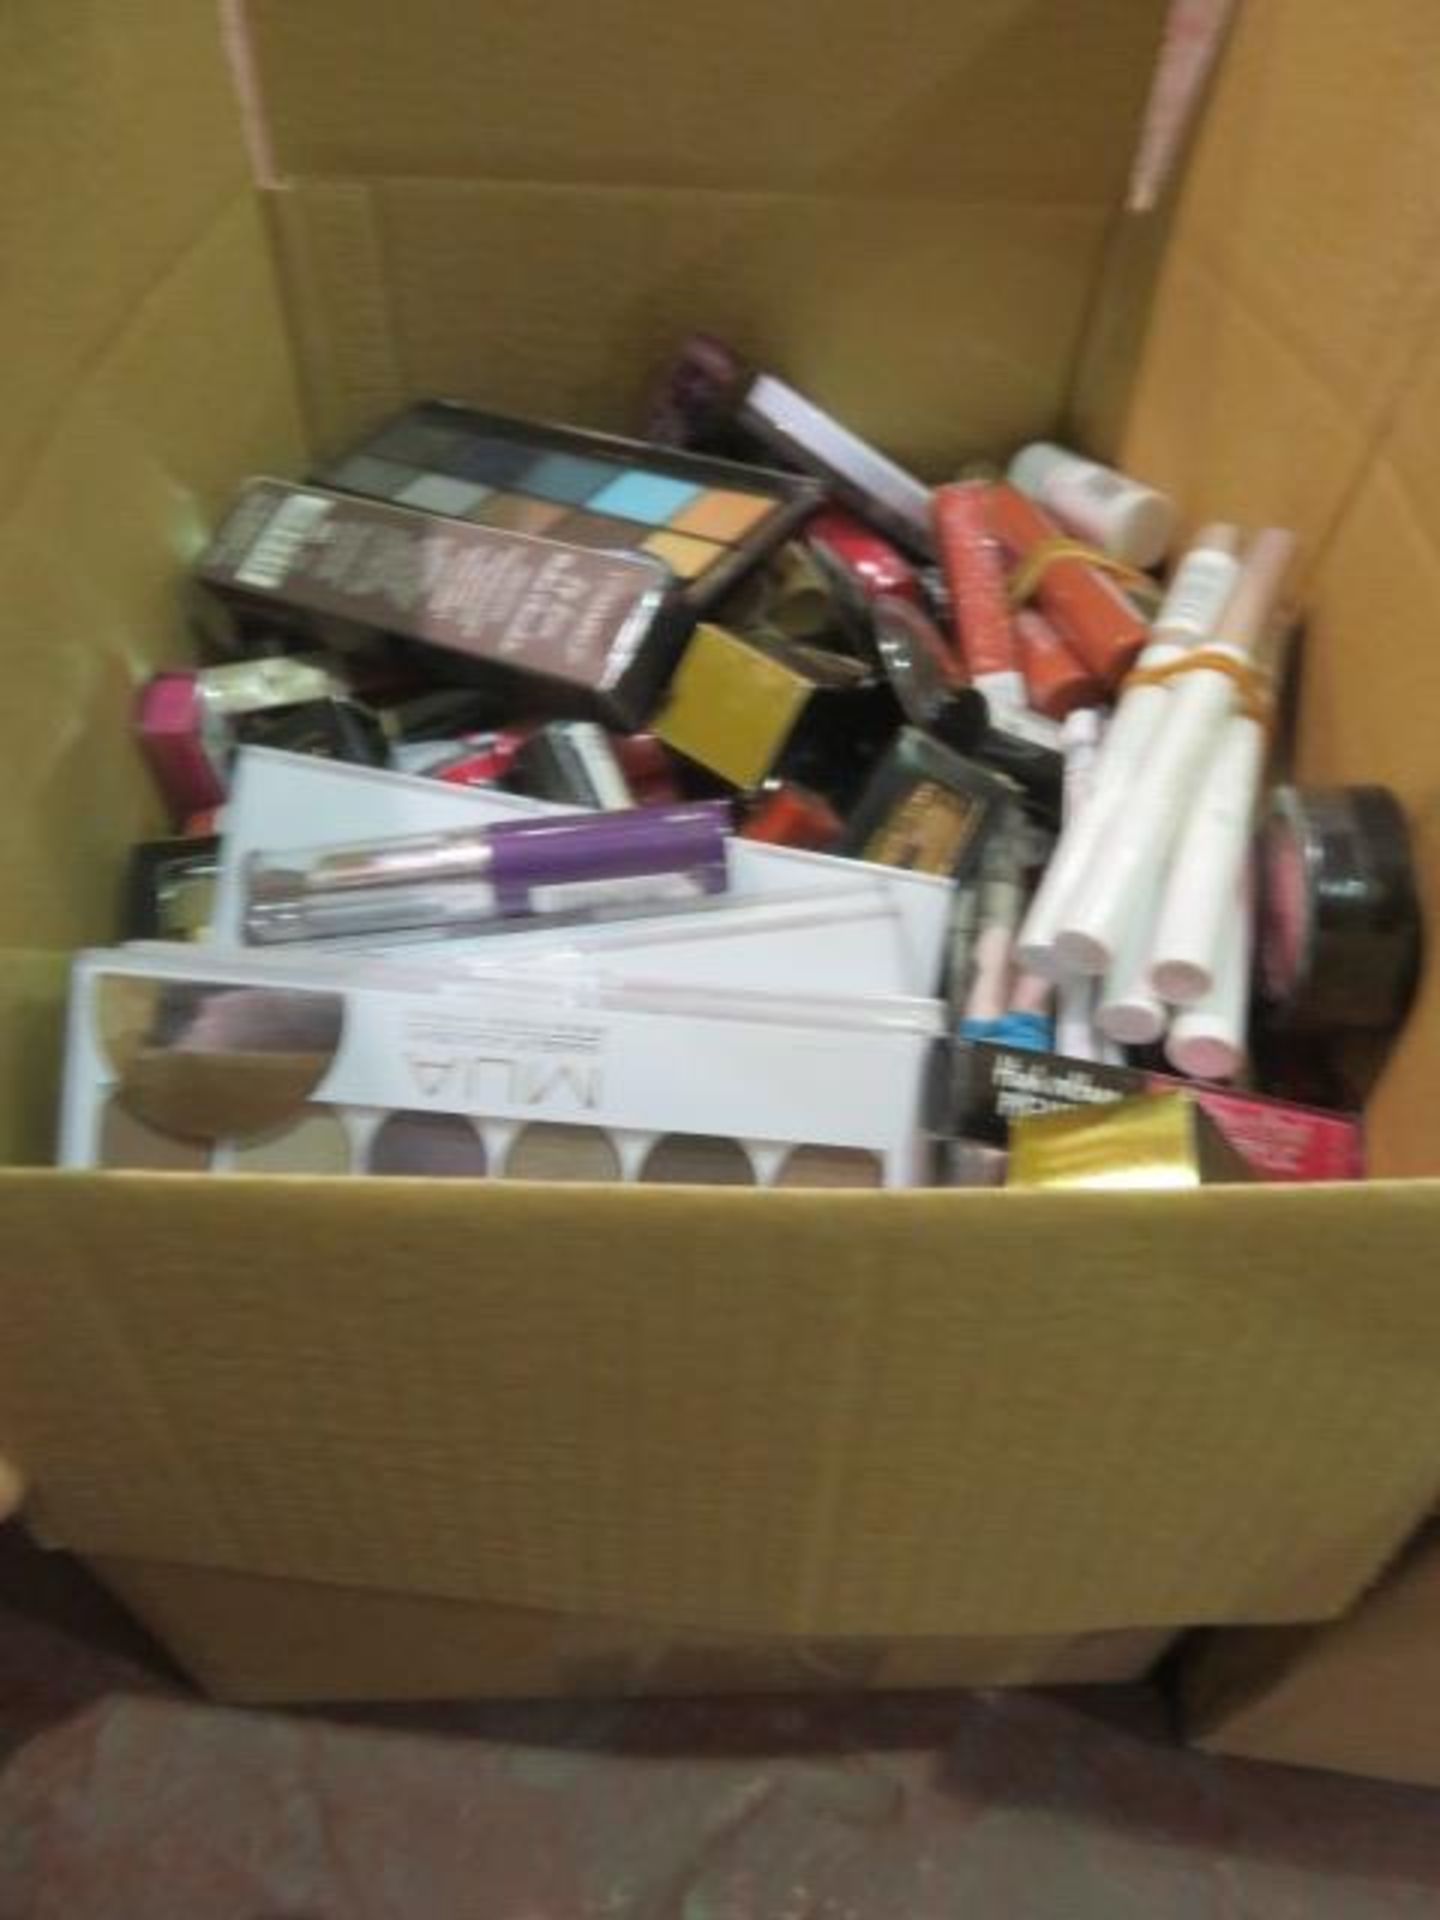 Circa. 200 items of various new make up acadamy make up to include: salted caramel lip lava, - Image 2 of 2